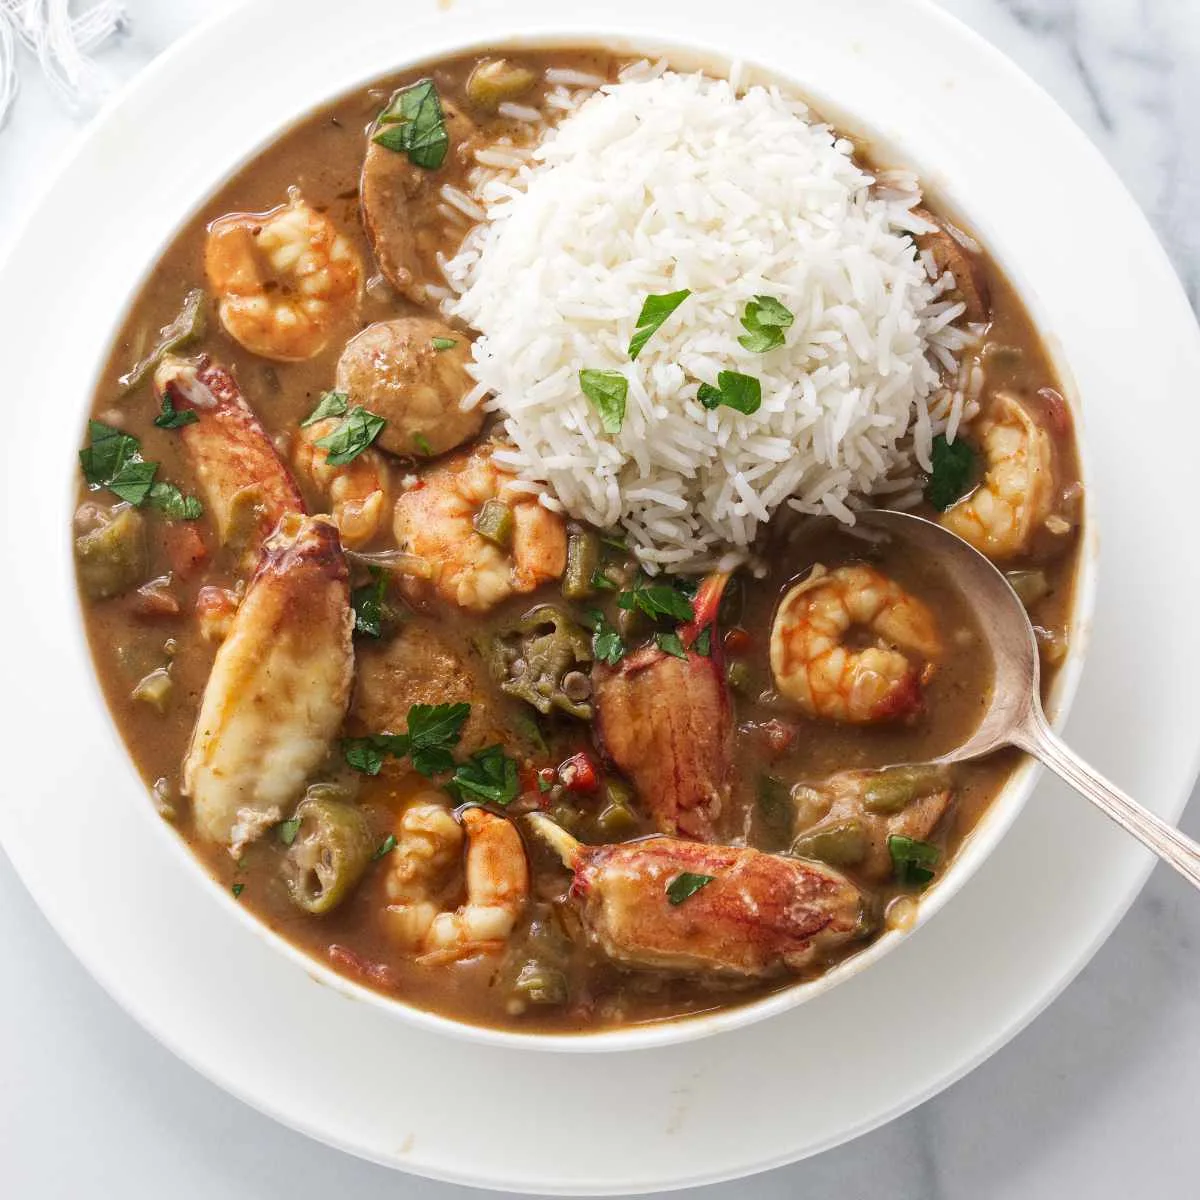 Seafood gumbo with a serving of white rice.